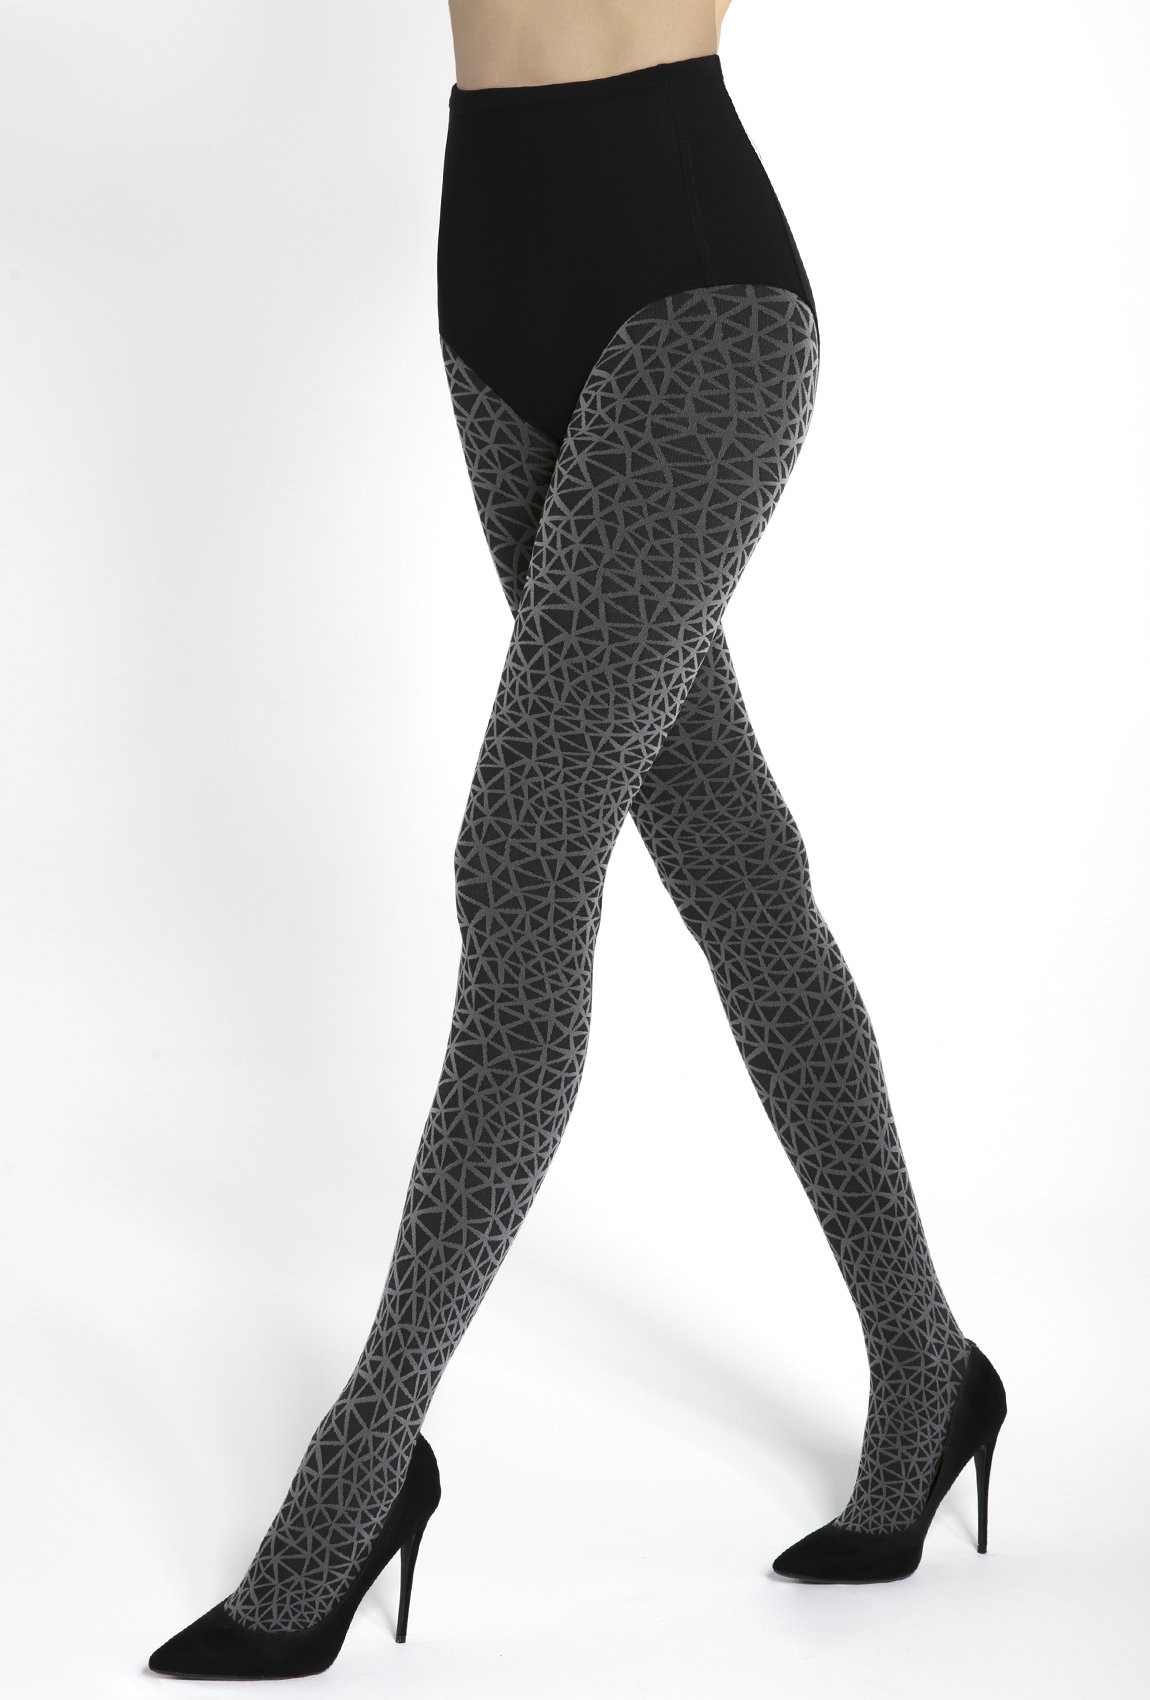 2 Pairs of 50 Denier Opaque Microfiber Tights